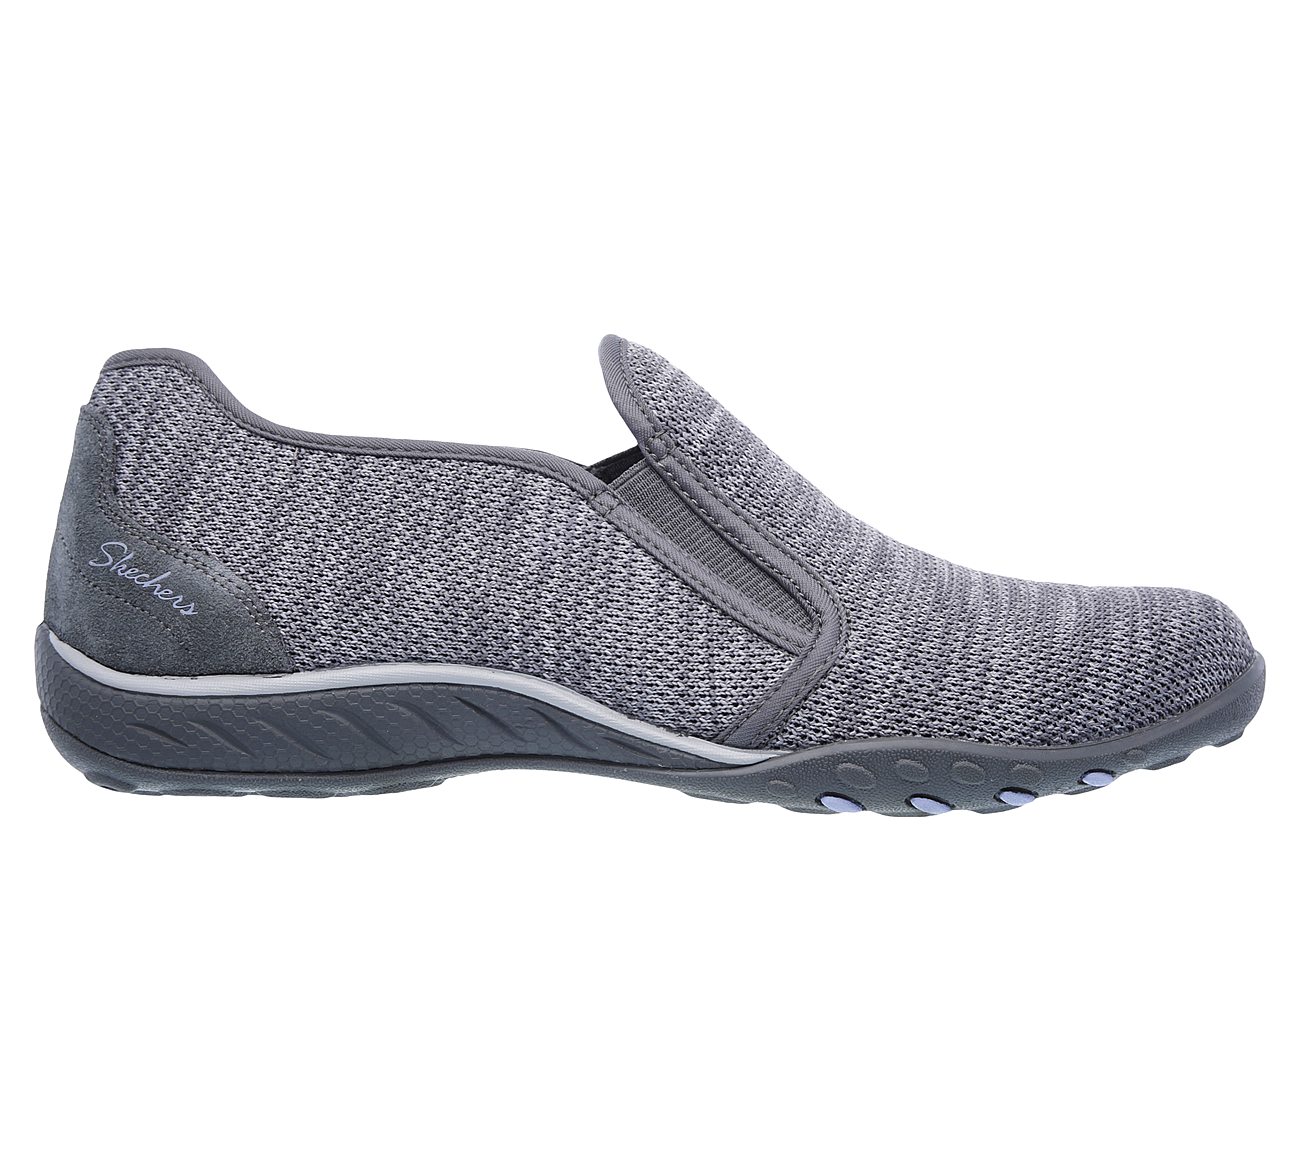 shoes similar to skechers